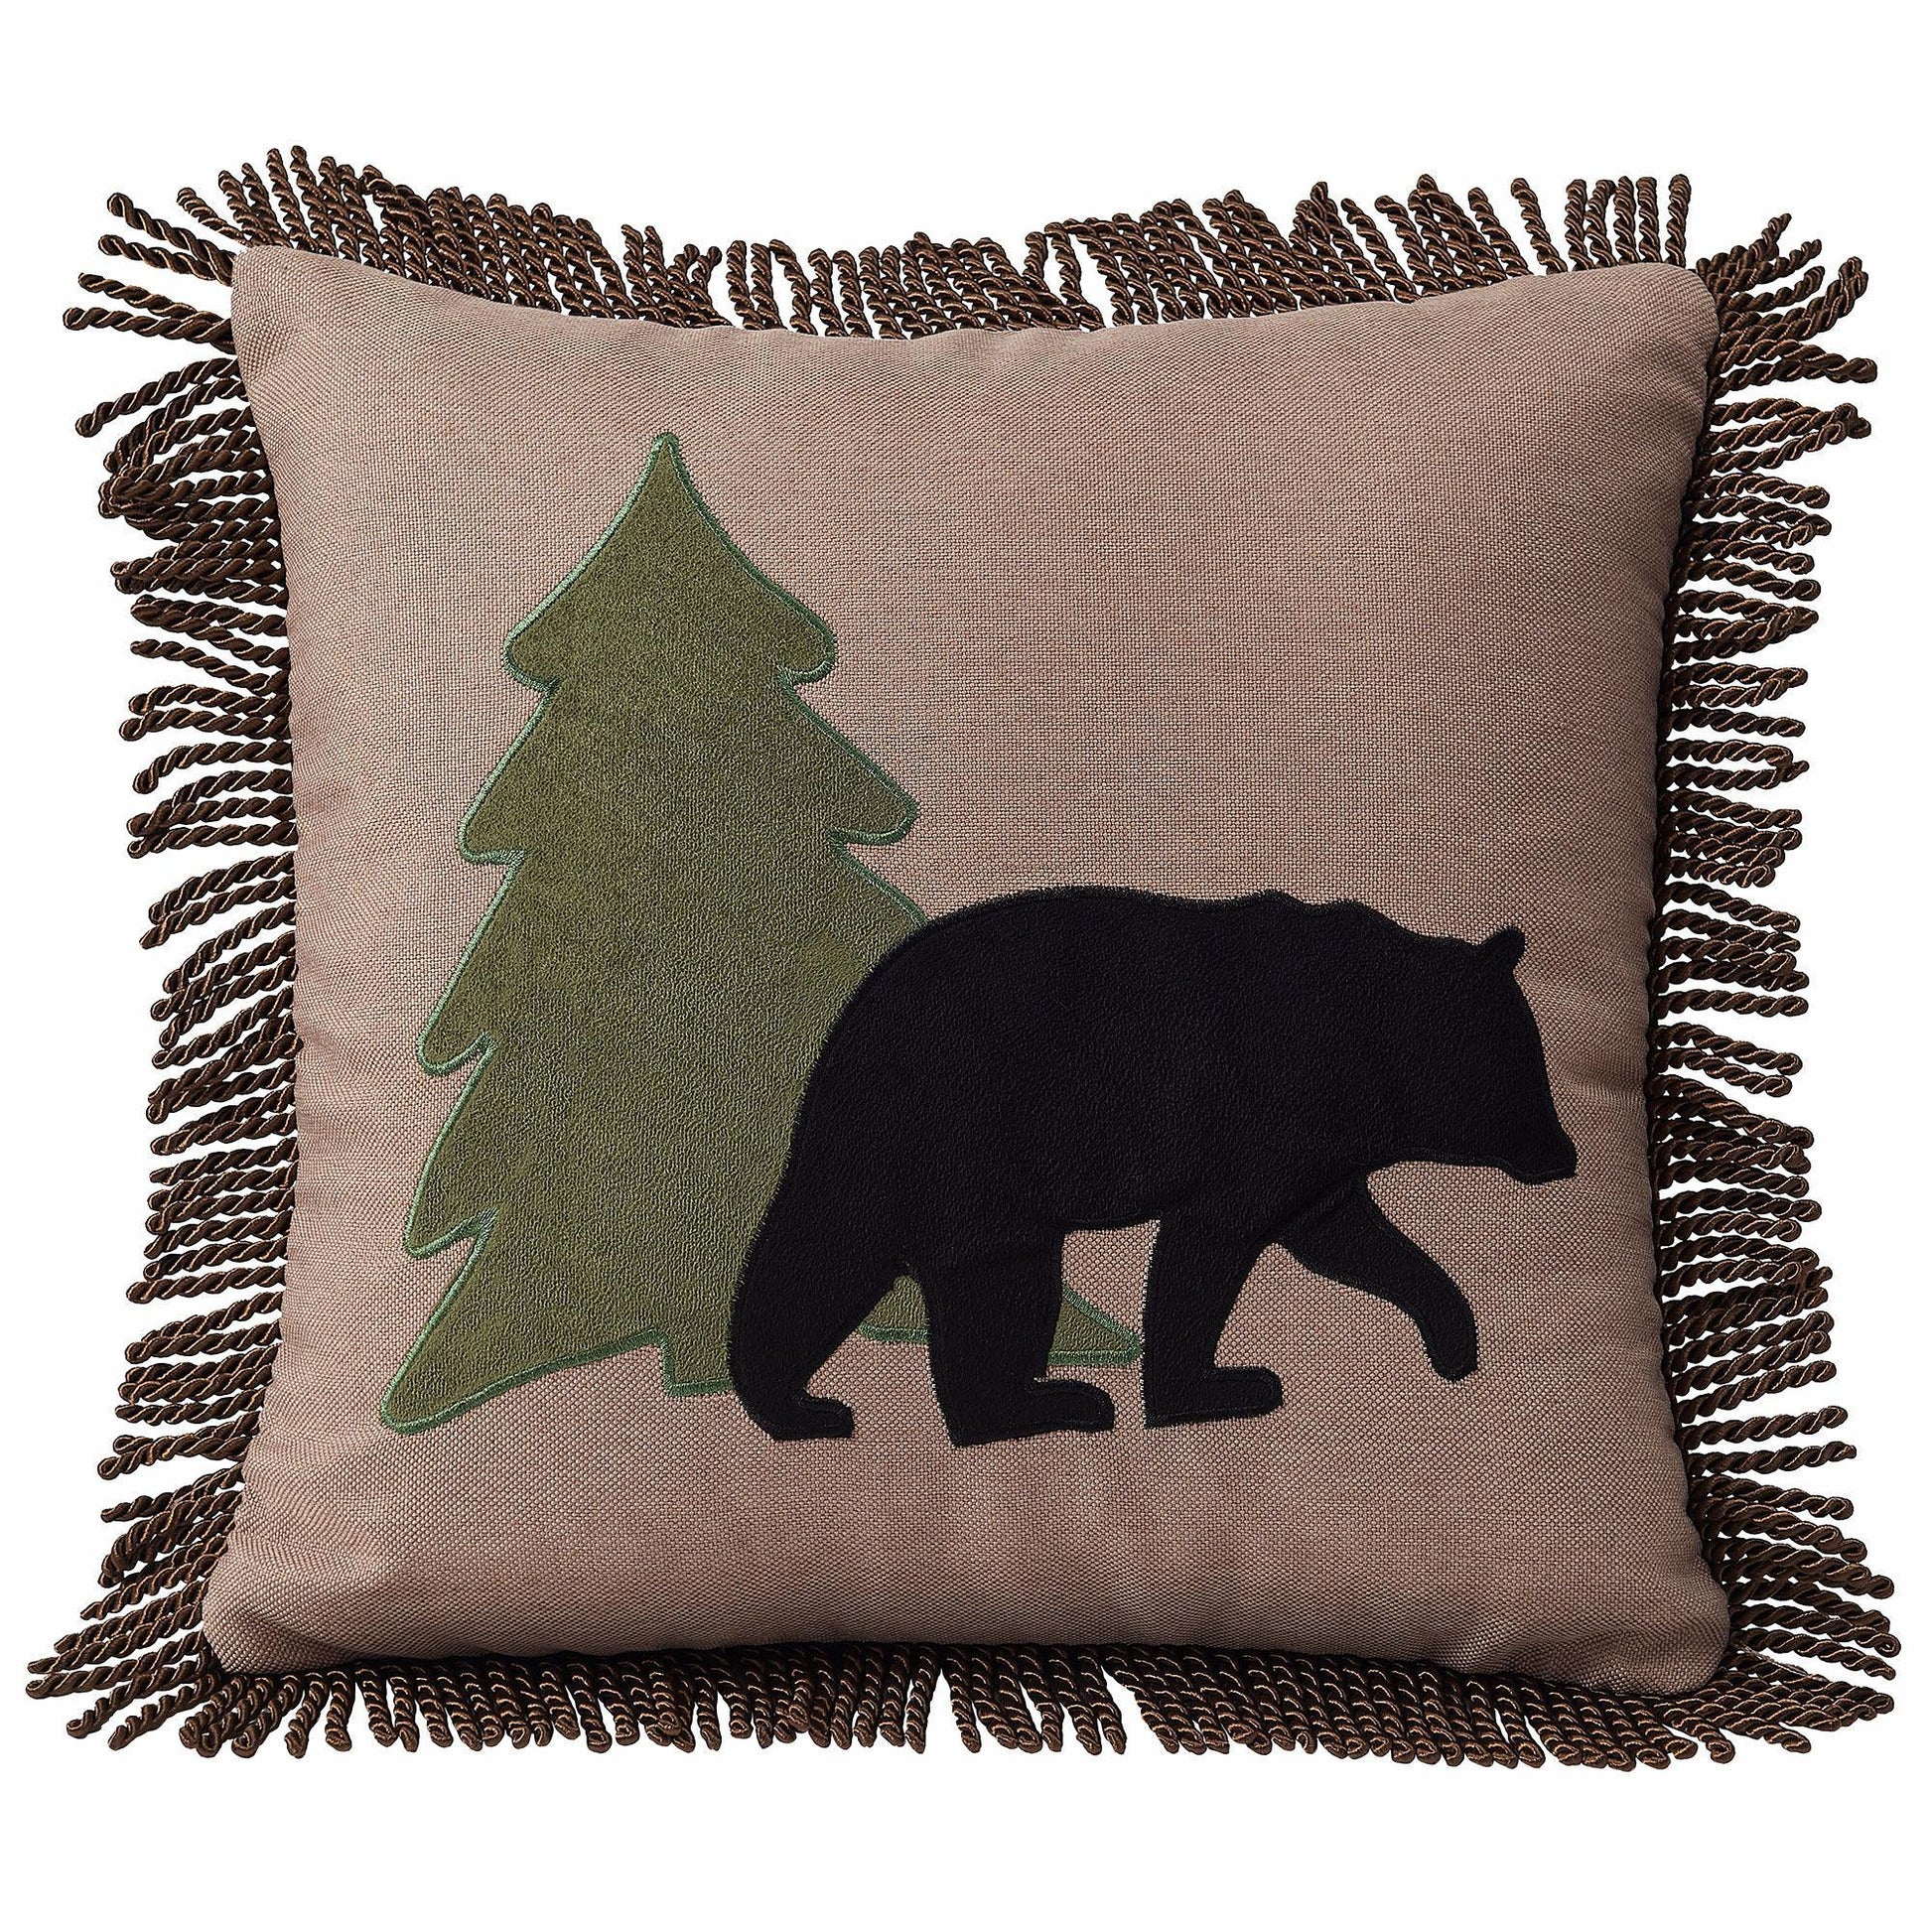 Bear and Pines Pillow - Wild Wings